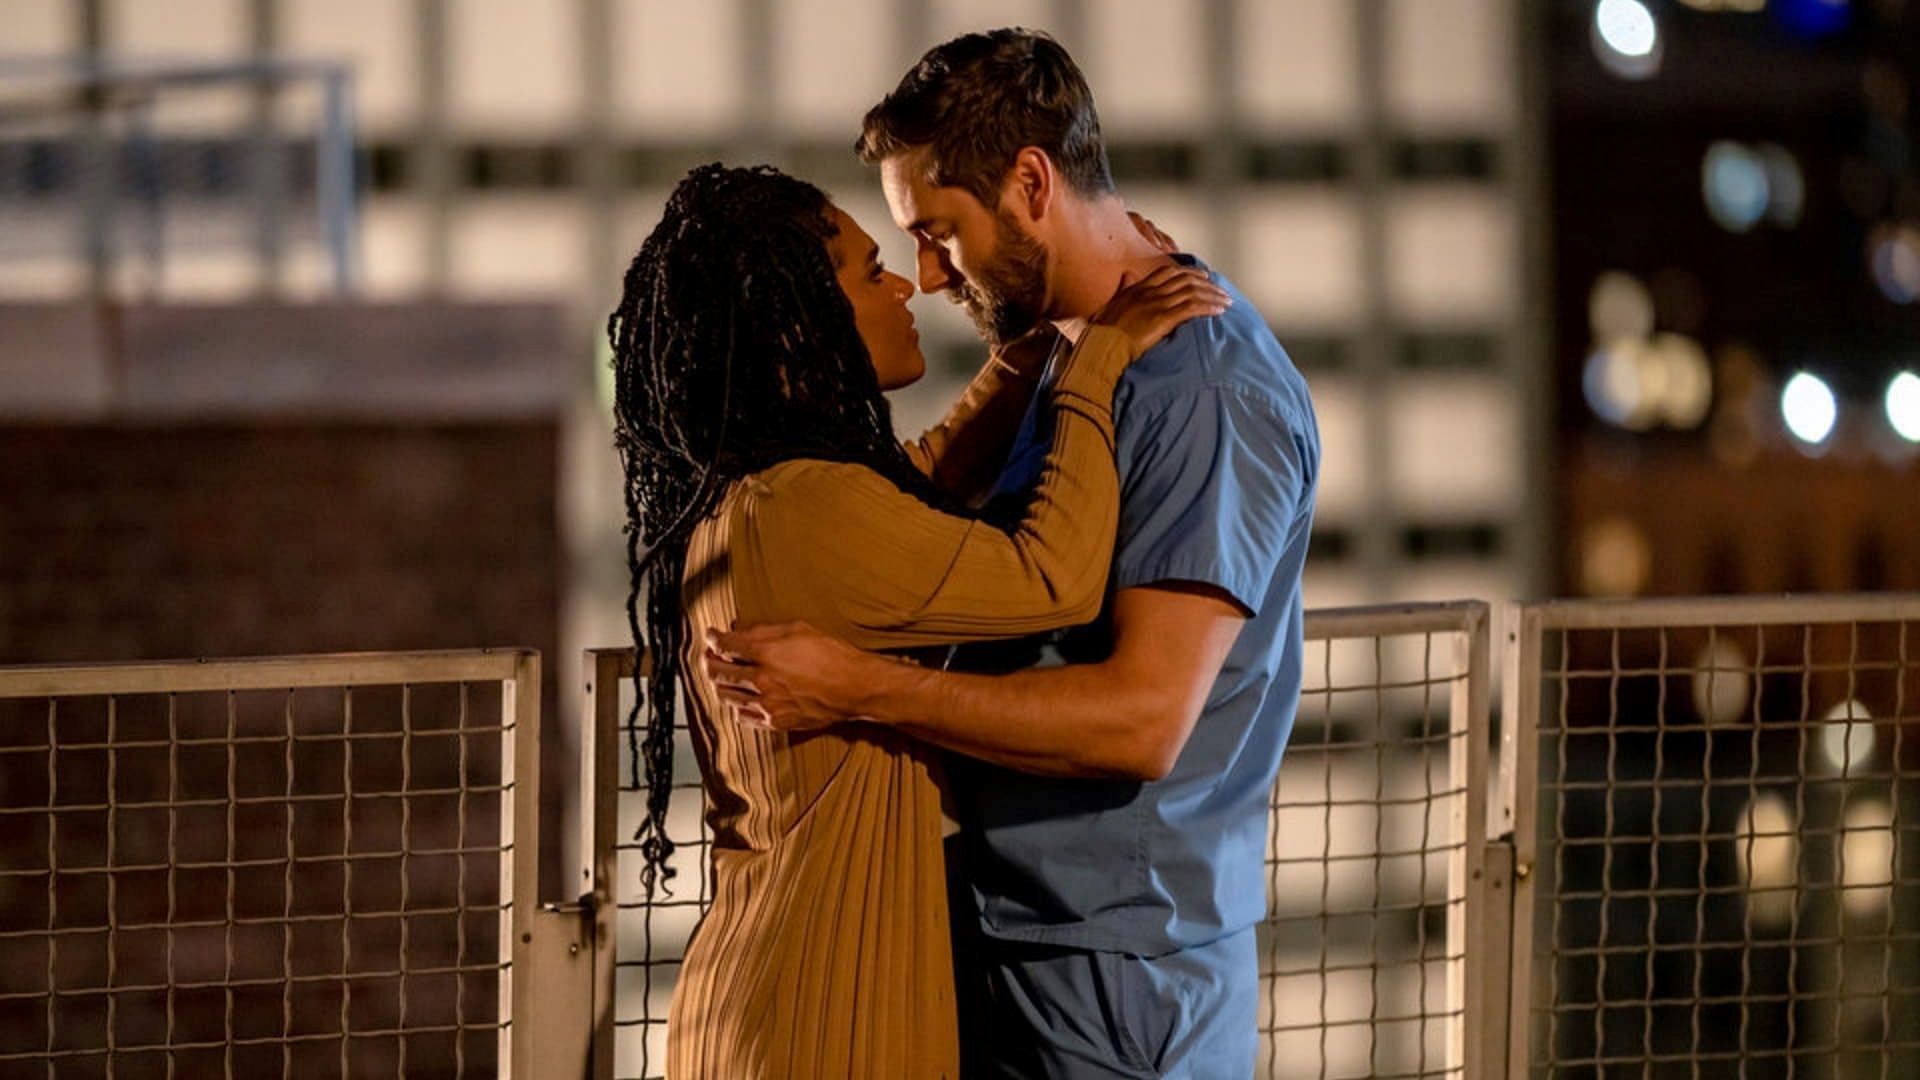 Dr. Helen Sharpe and Dr. Max Goodwin in New Amsterdam (Image via NBC)